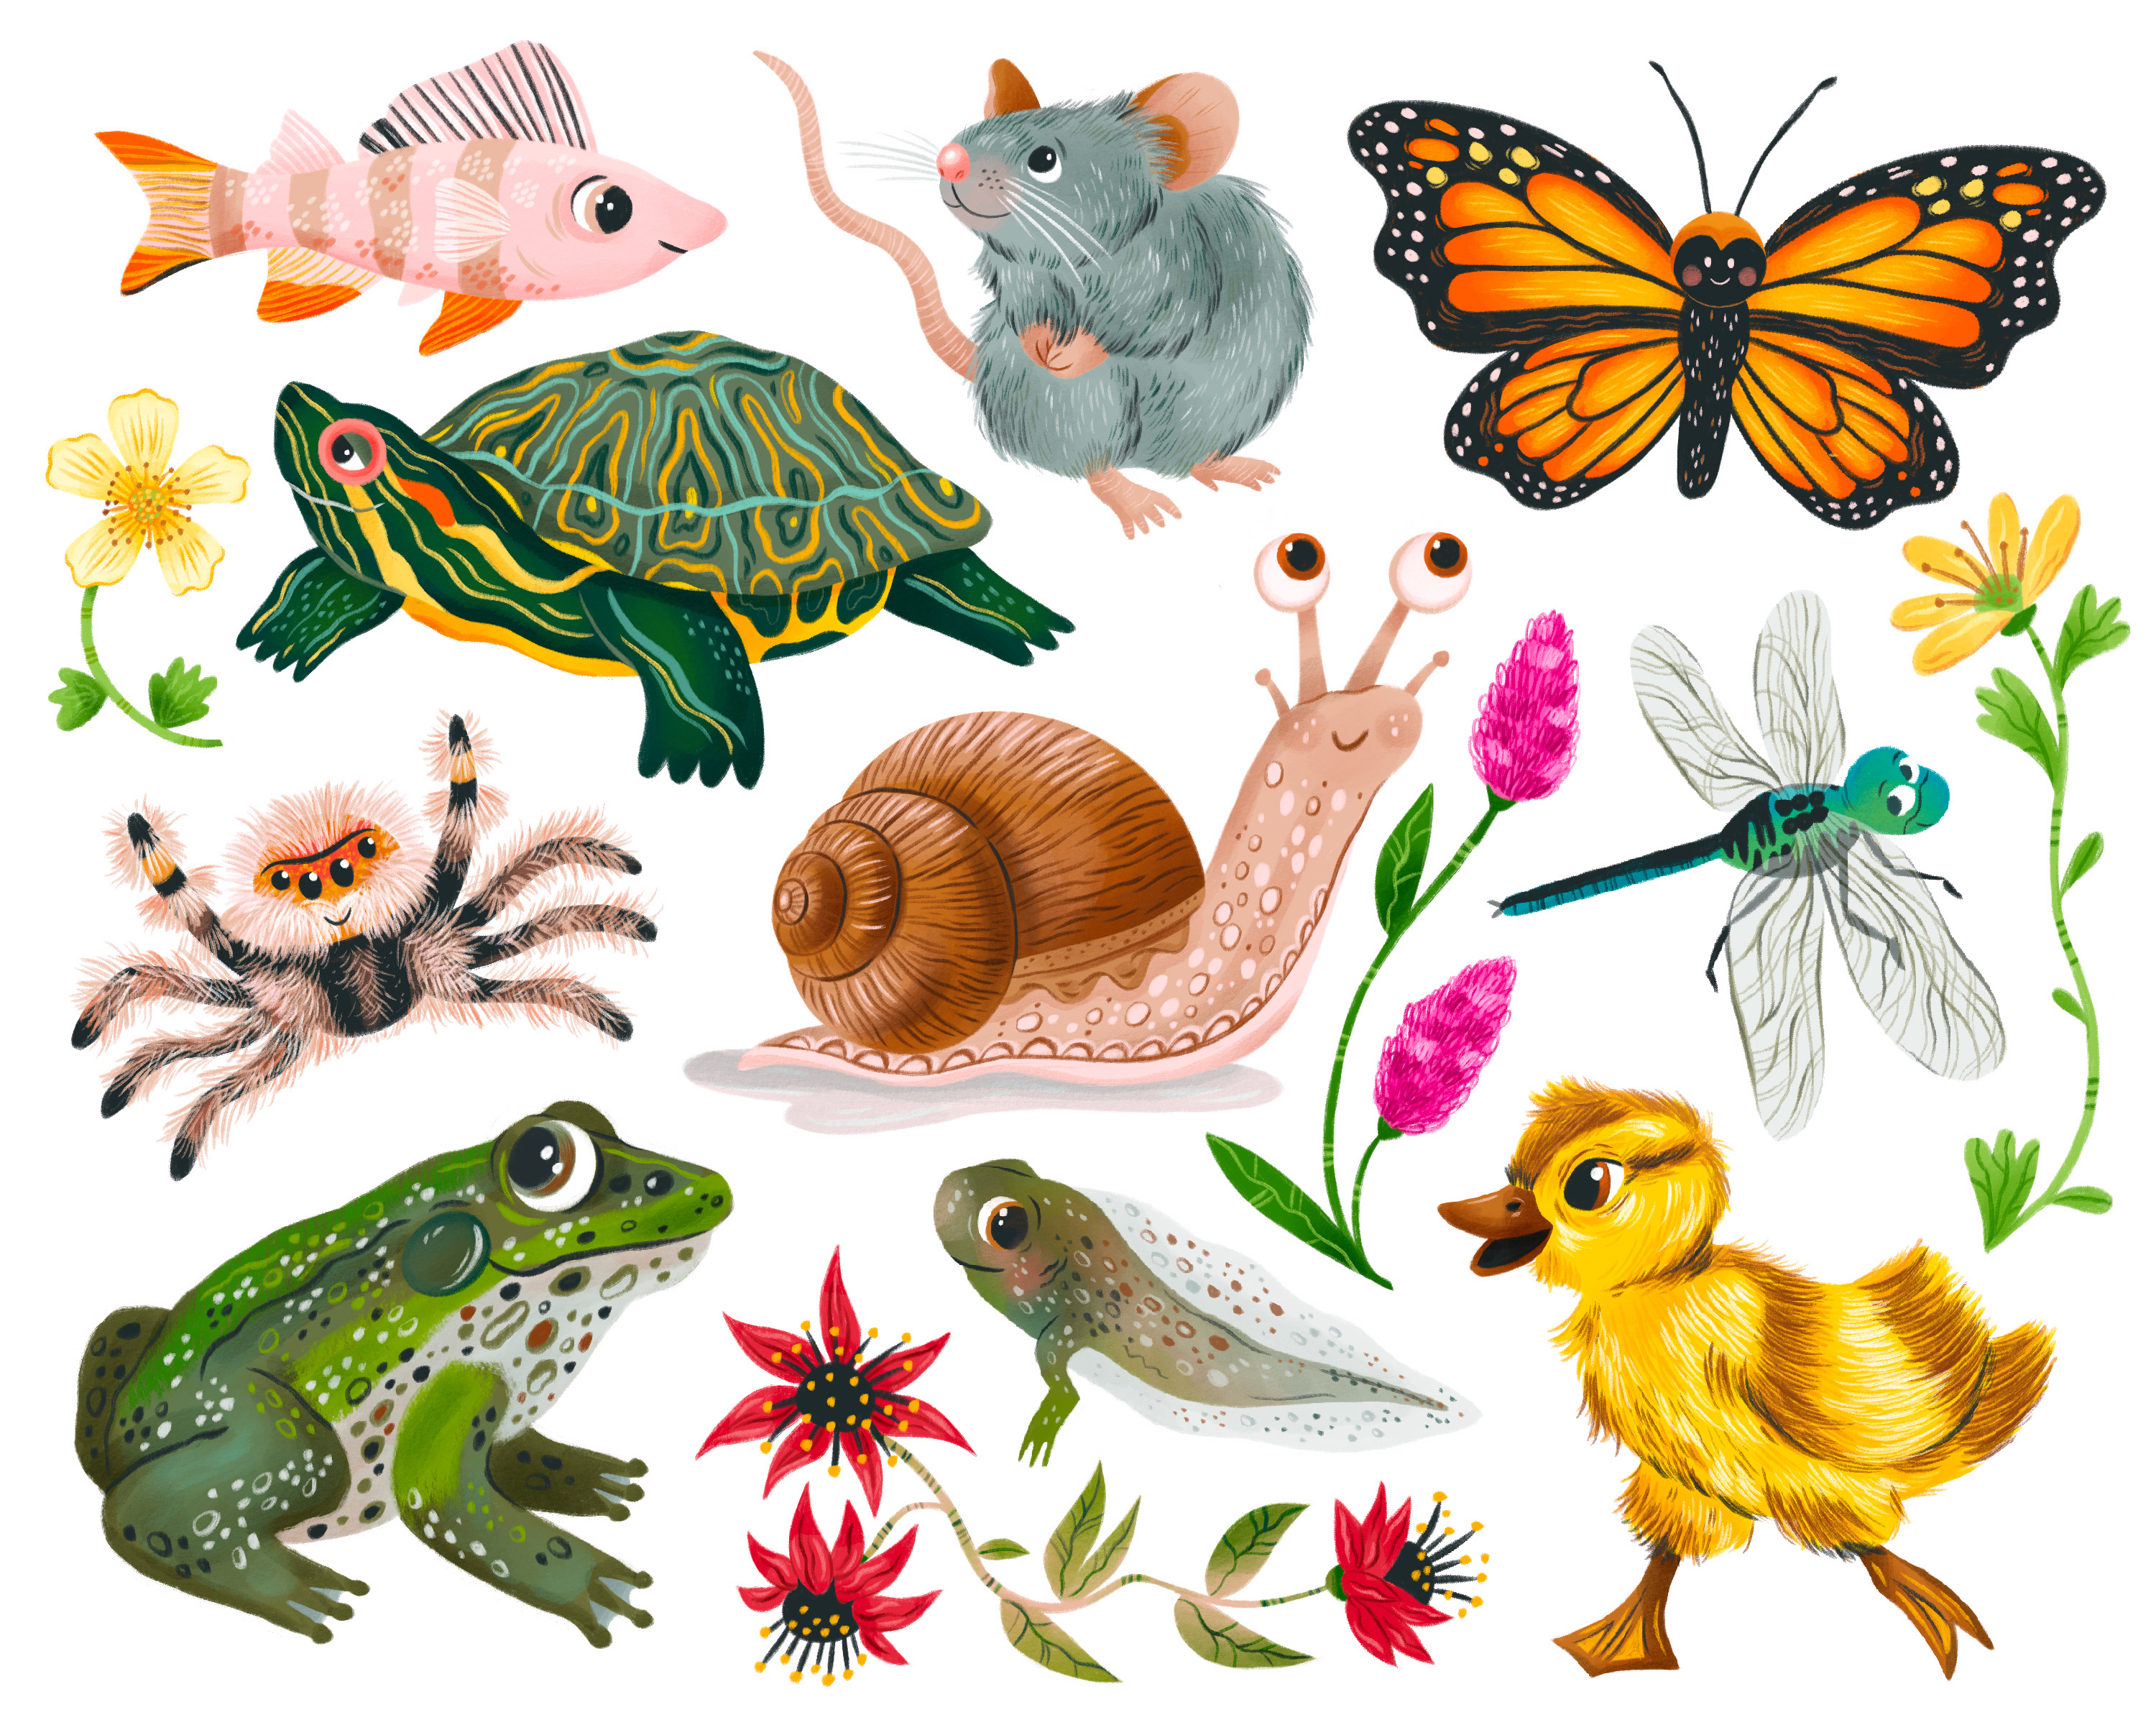 Illustration os various animals including a frog, butterfly, and turtle.